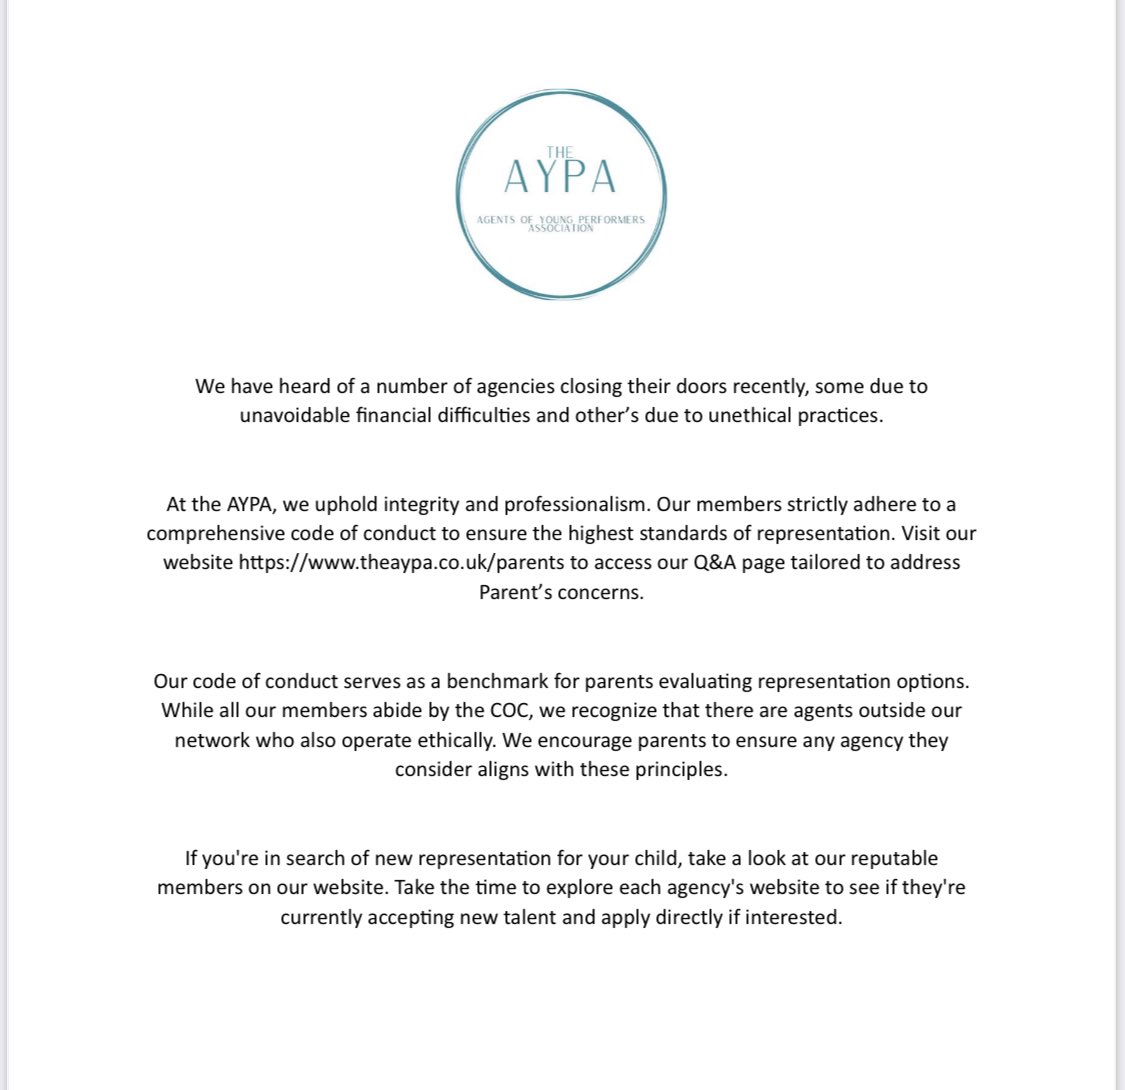 Statement from the AYPA with regard to recent closures of agencies. Link here to access our parents’ page theaypa.co.uk/parents